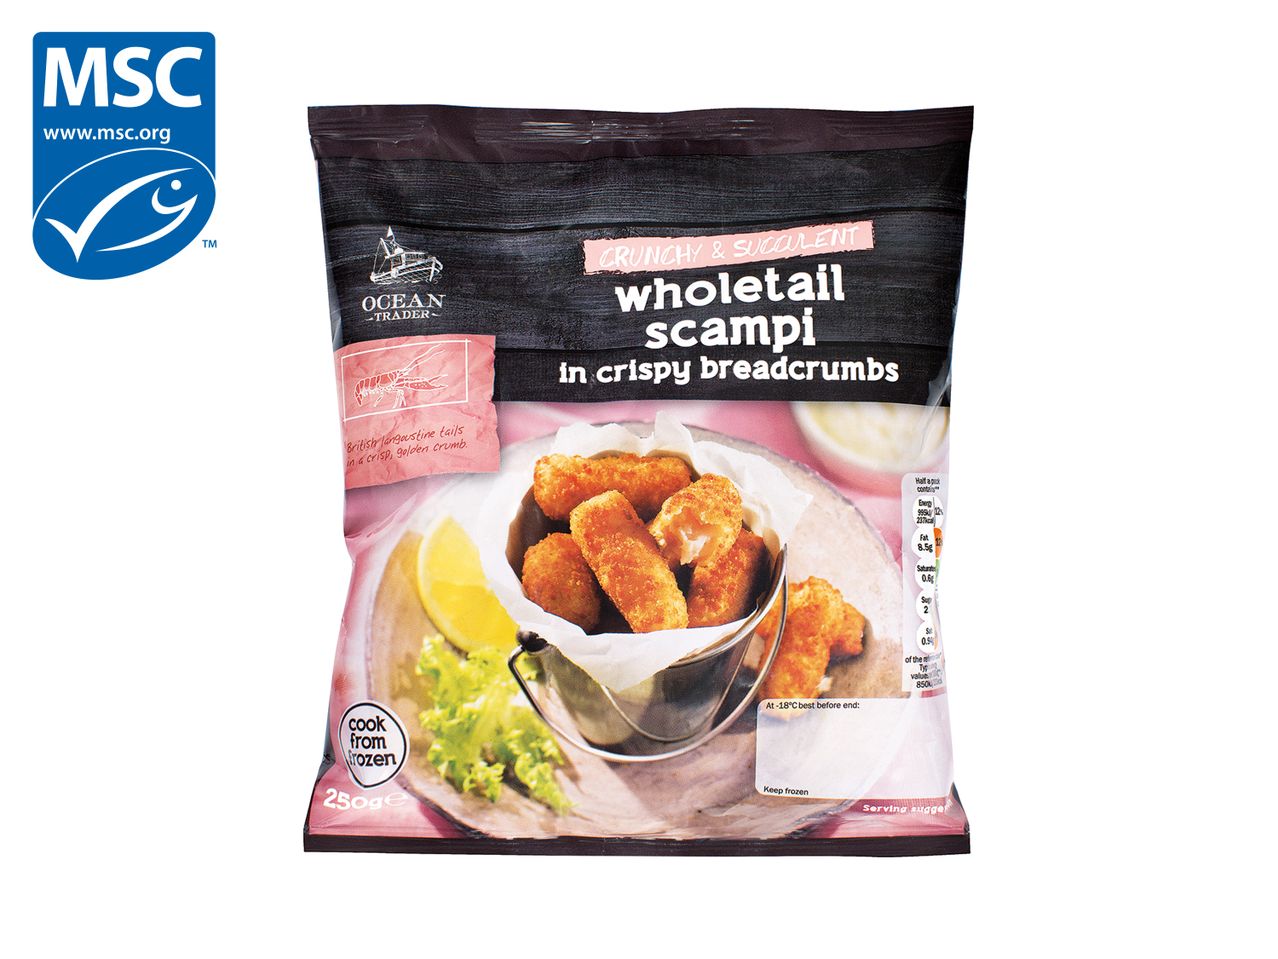 Go to full screen view: Ocean Trader Frozen Breaded Wholetail Scampi - Image 1